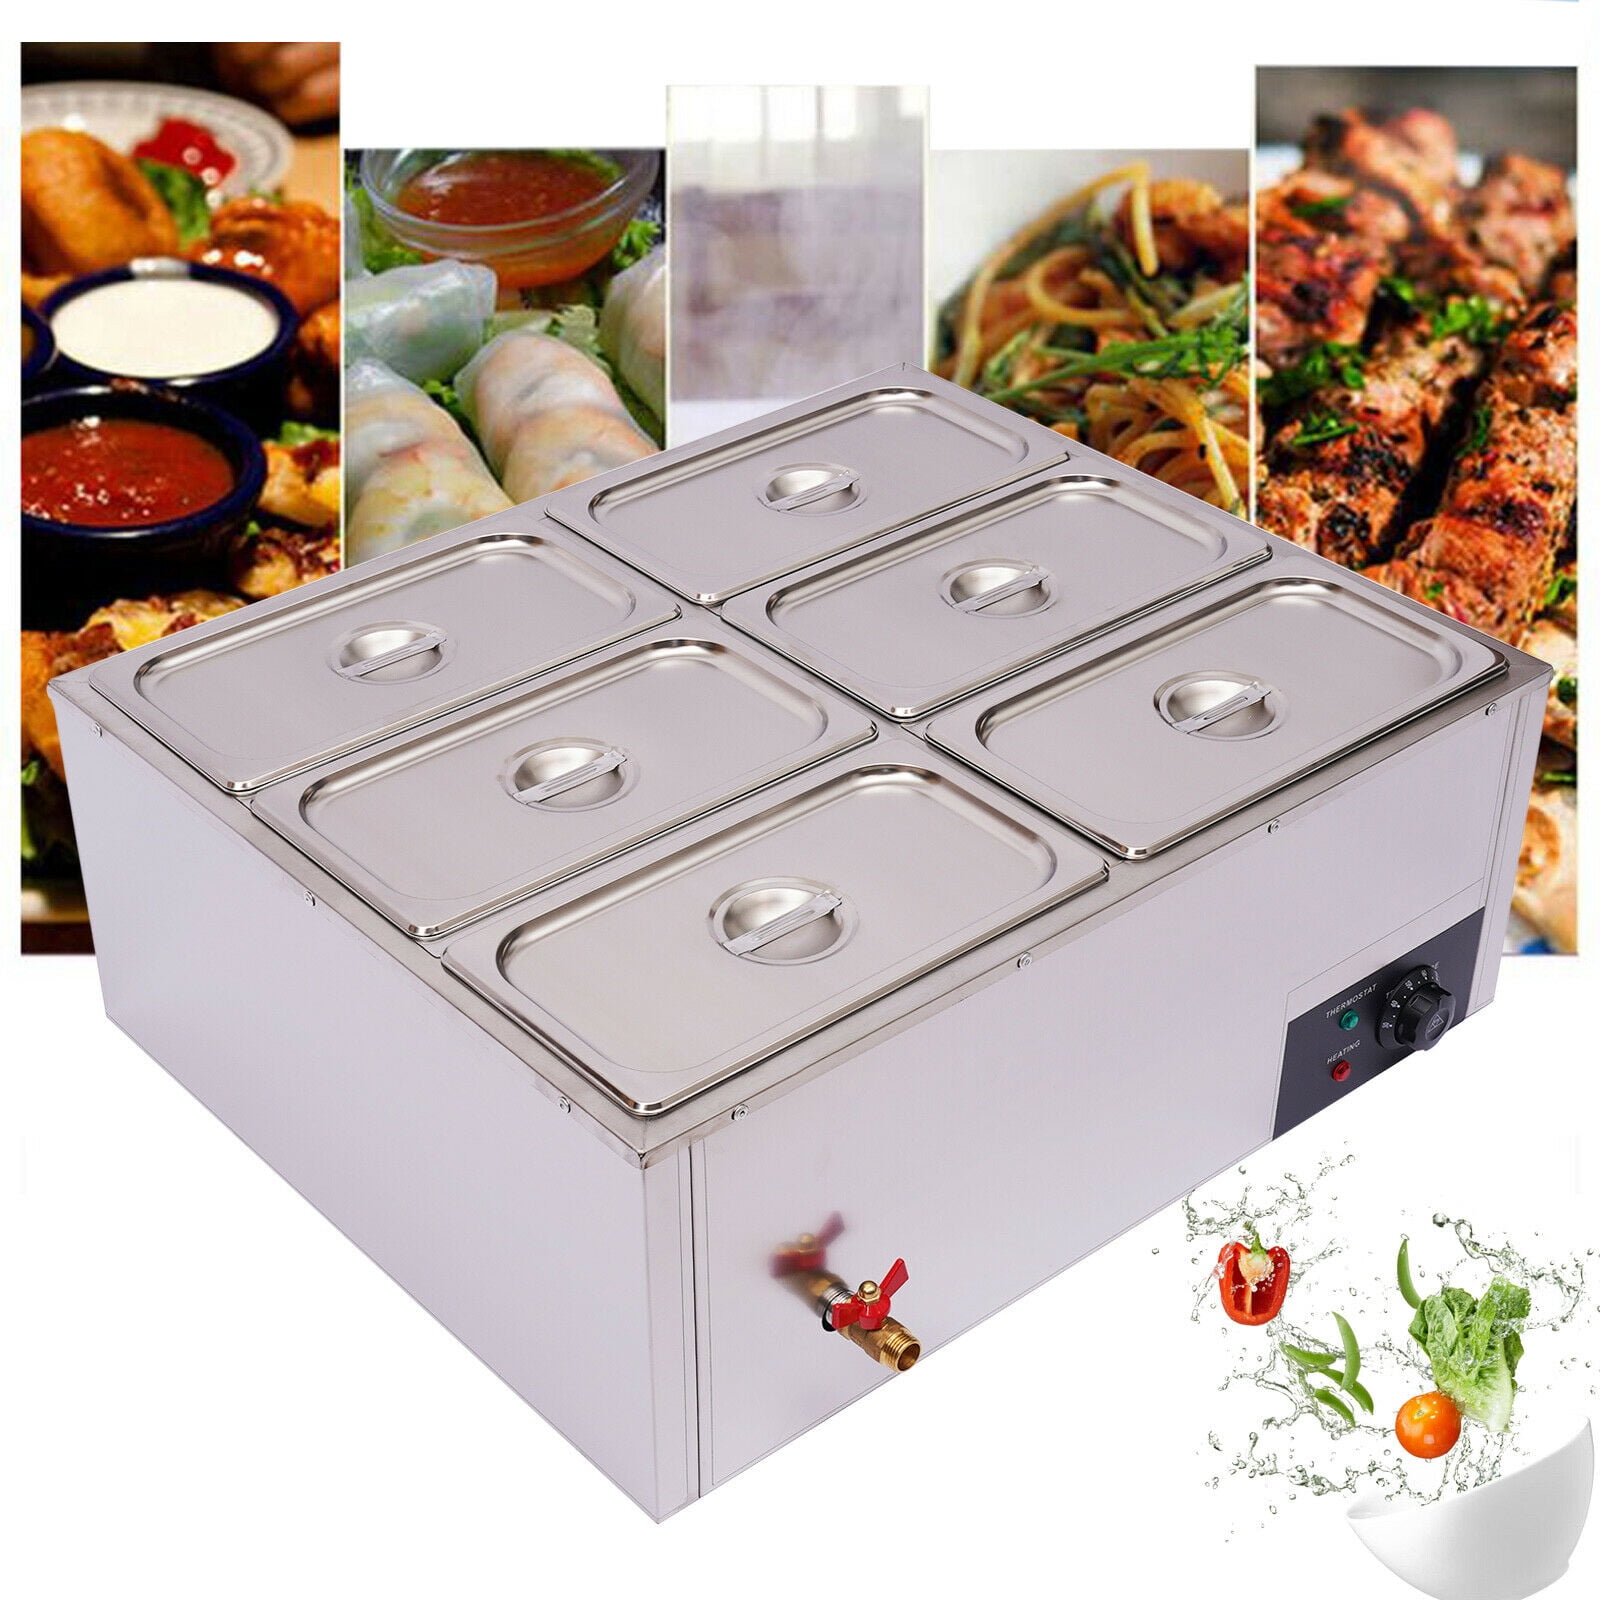 FULL SIZE Electric 4" PAN & LID Countertop Buffet Food Warmer COOKER Commercial 